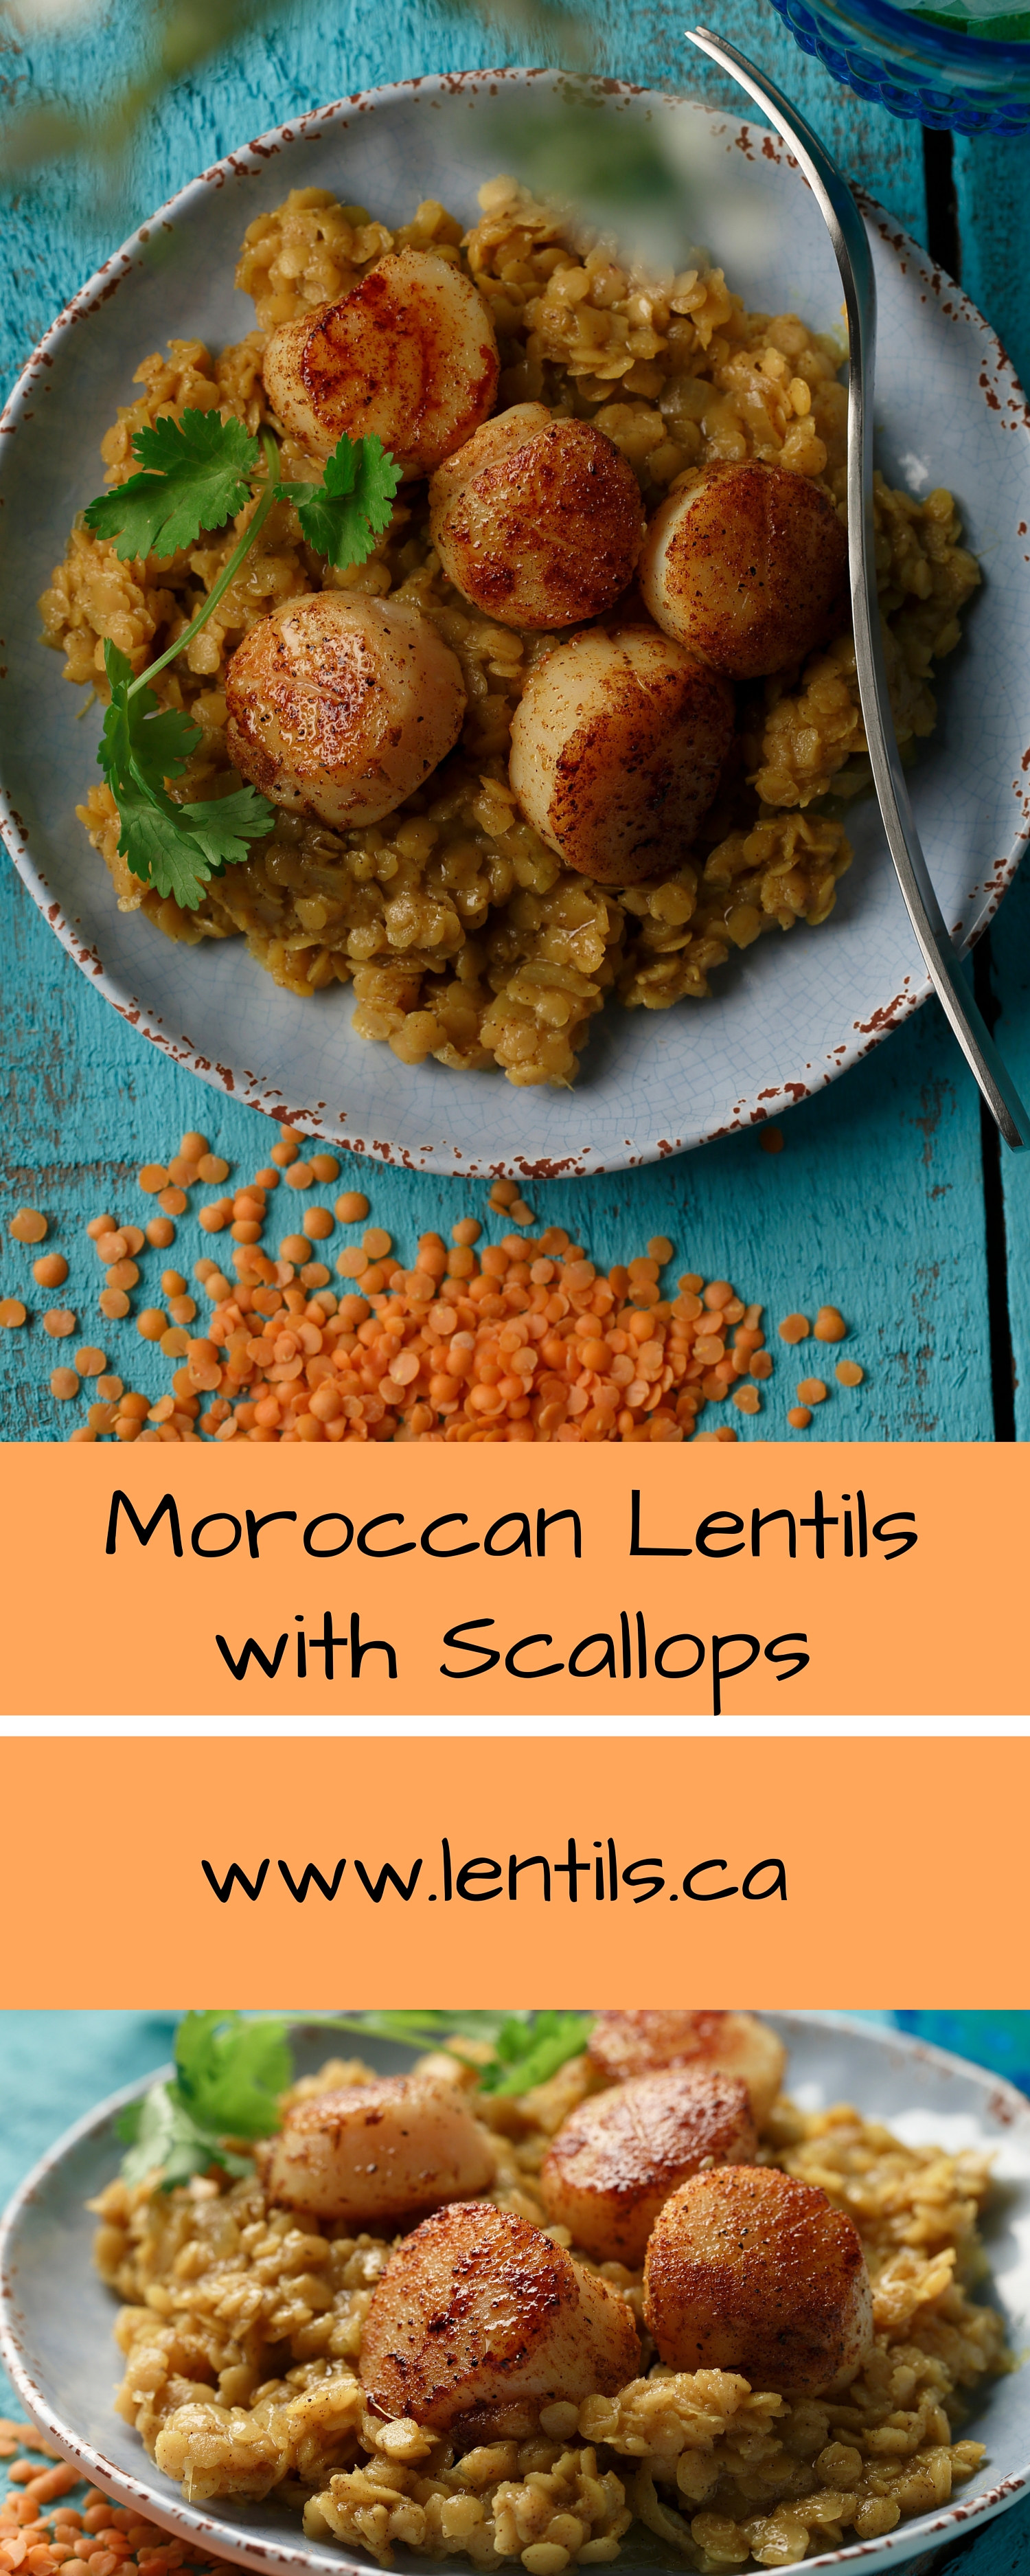 Moroccan Lentils with Scallops – Lentils.org